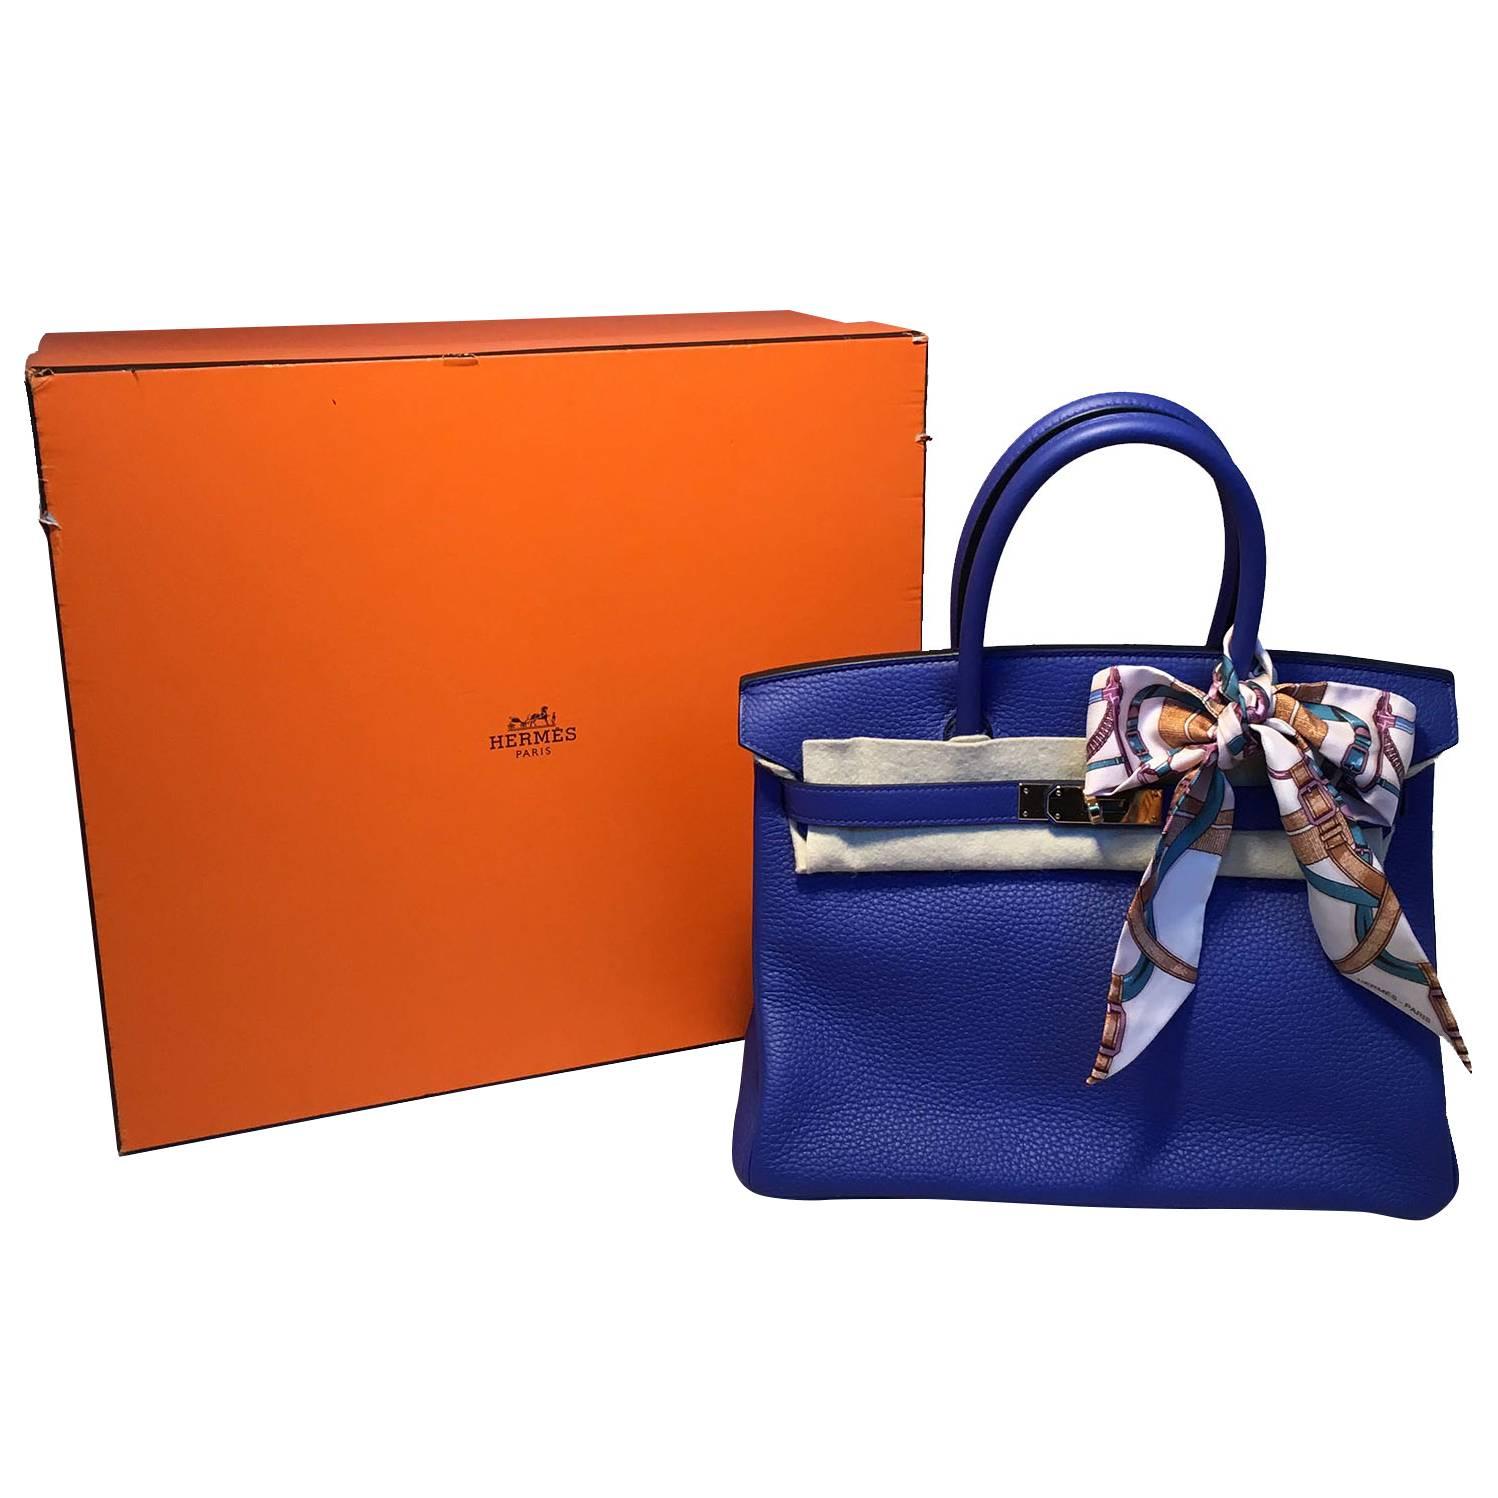 STUNNING NEW Hermes Blue electric Clemence Leather 30cm GHW Birkin Bag in excellent like new condition. blue electric limited edition clemence leather exterior trimmed with shinning gold hardware. Signature double strap twist top closure opens to a